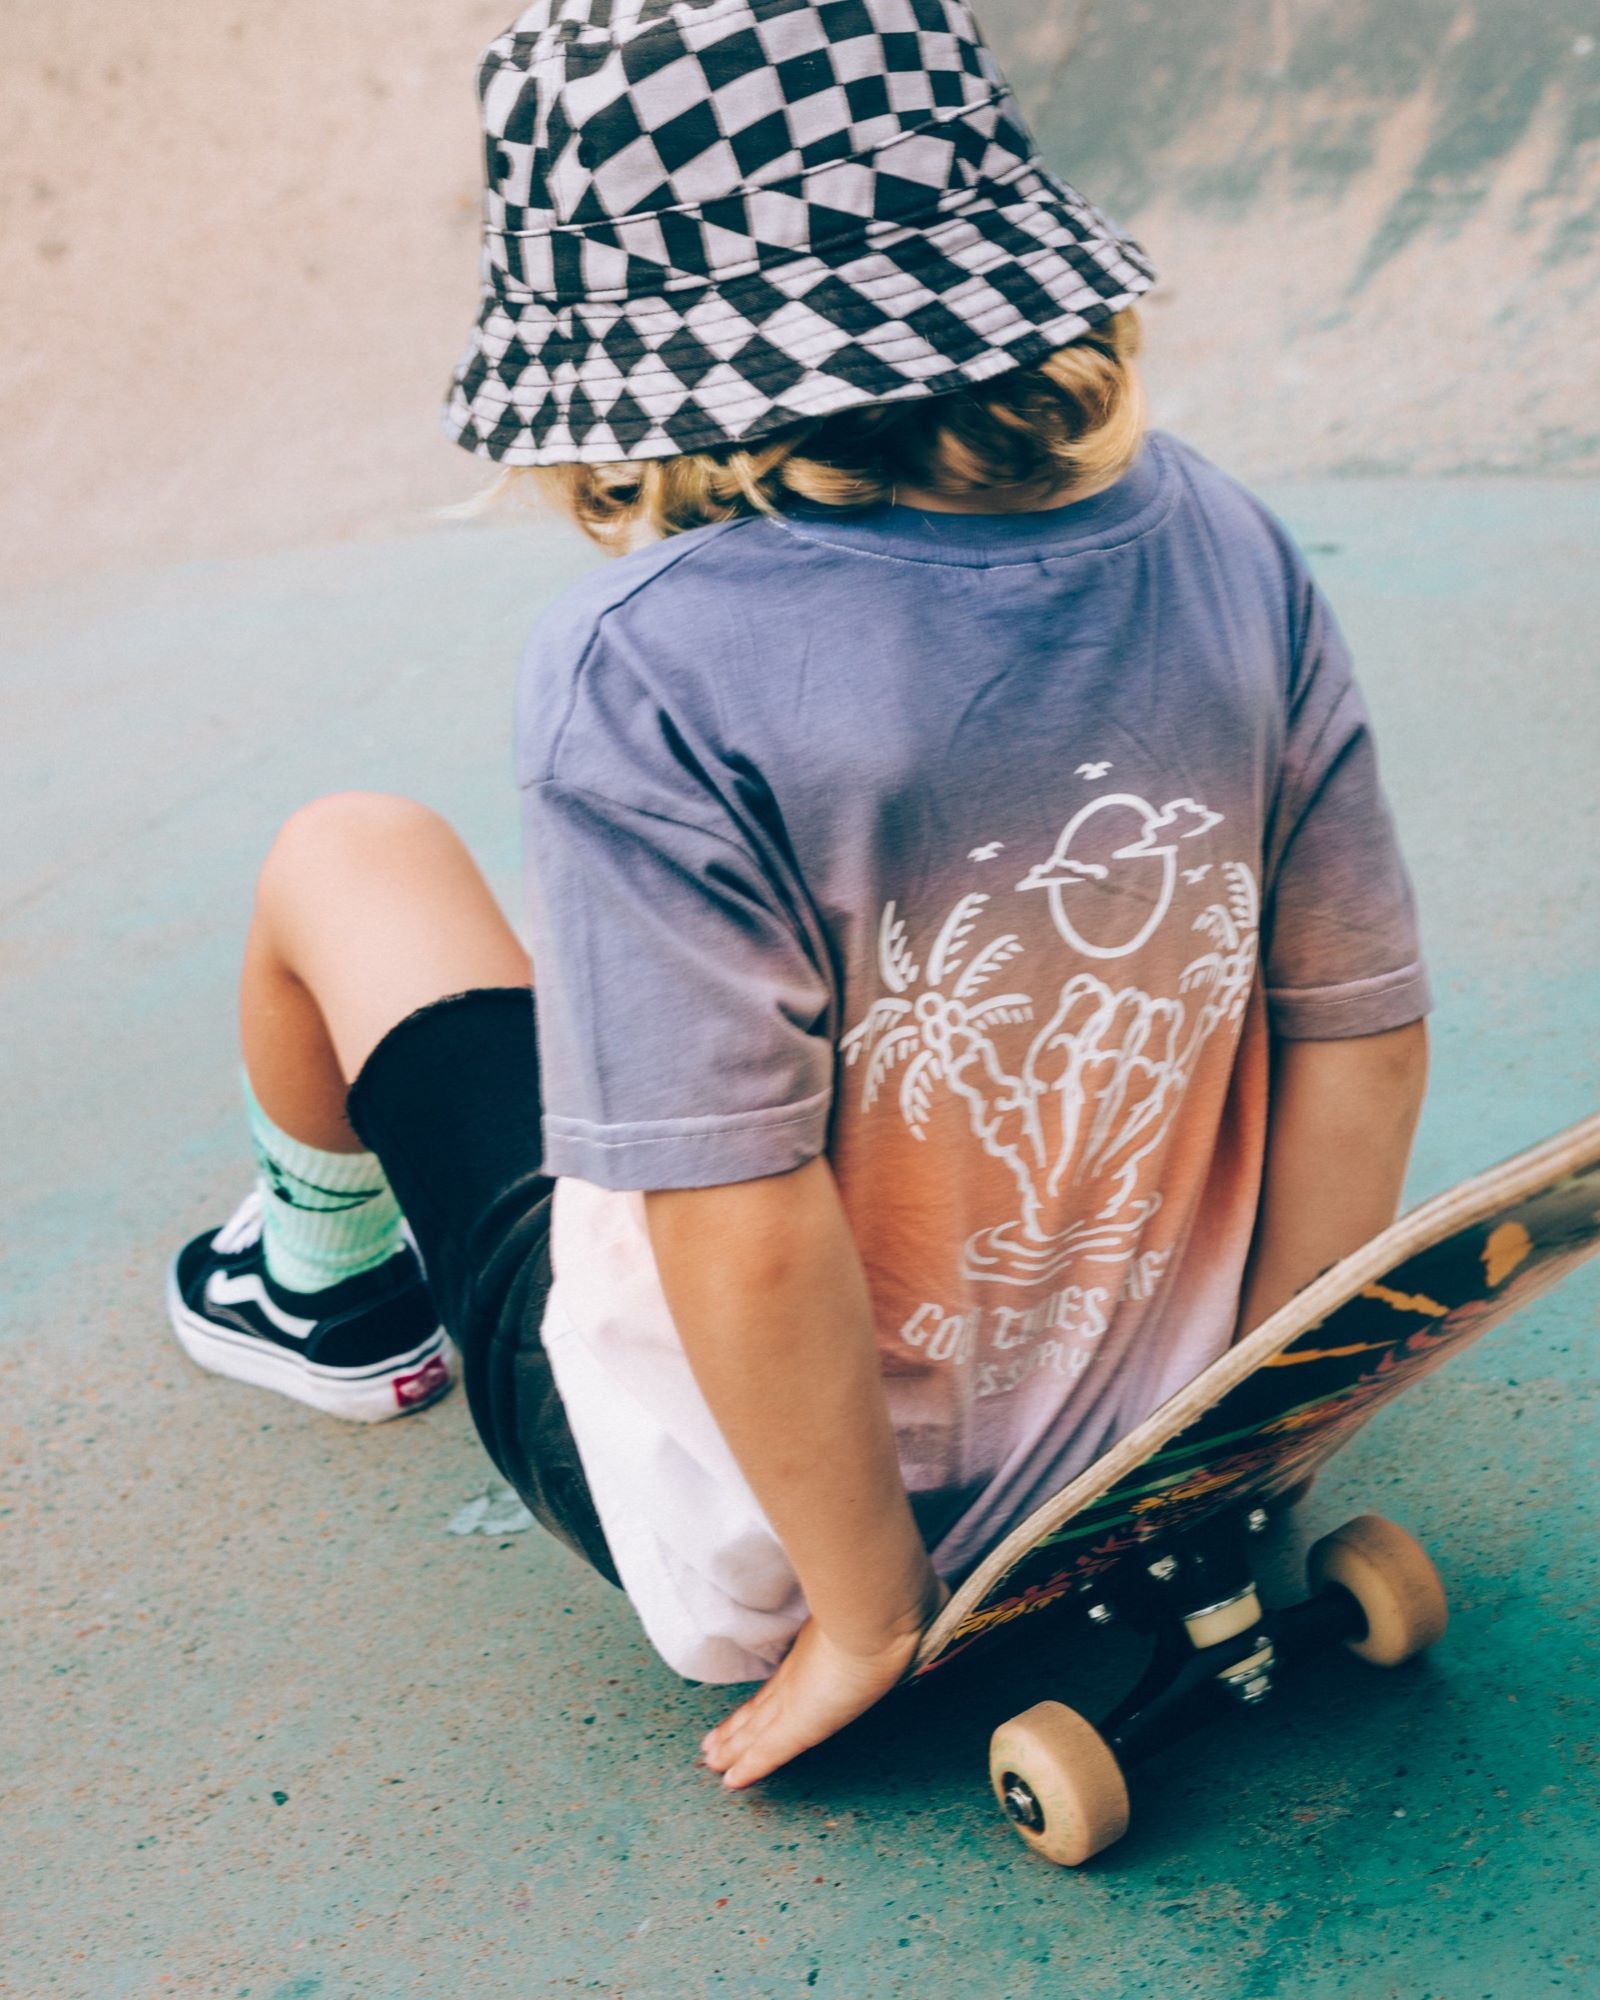 Alphabet Soup's Kids Venice Dip Dye Tee for boys aged 8 to 16. Featuring 100% Cotton Jersey, a box tee fit, and short sleeves. It comes in a Blue/Peach/White colourway with 3-colour dip dye and shaka prints on both chest and back.